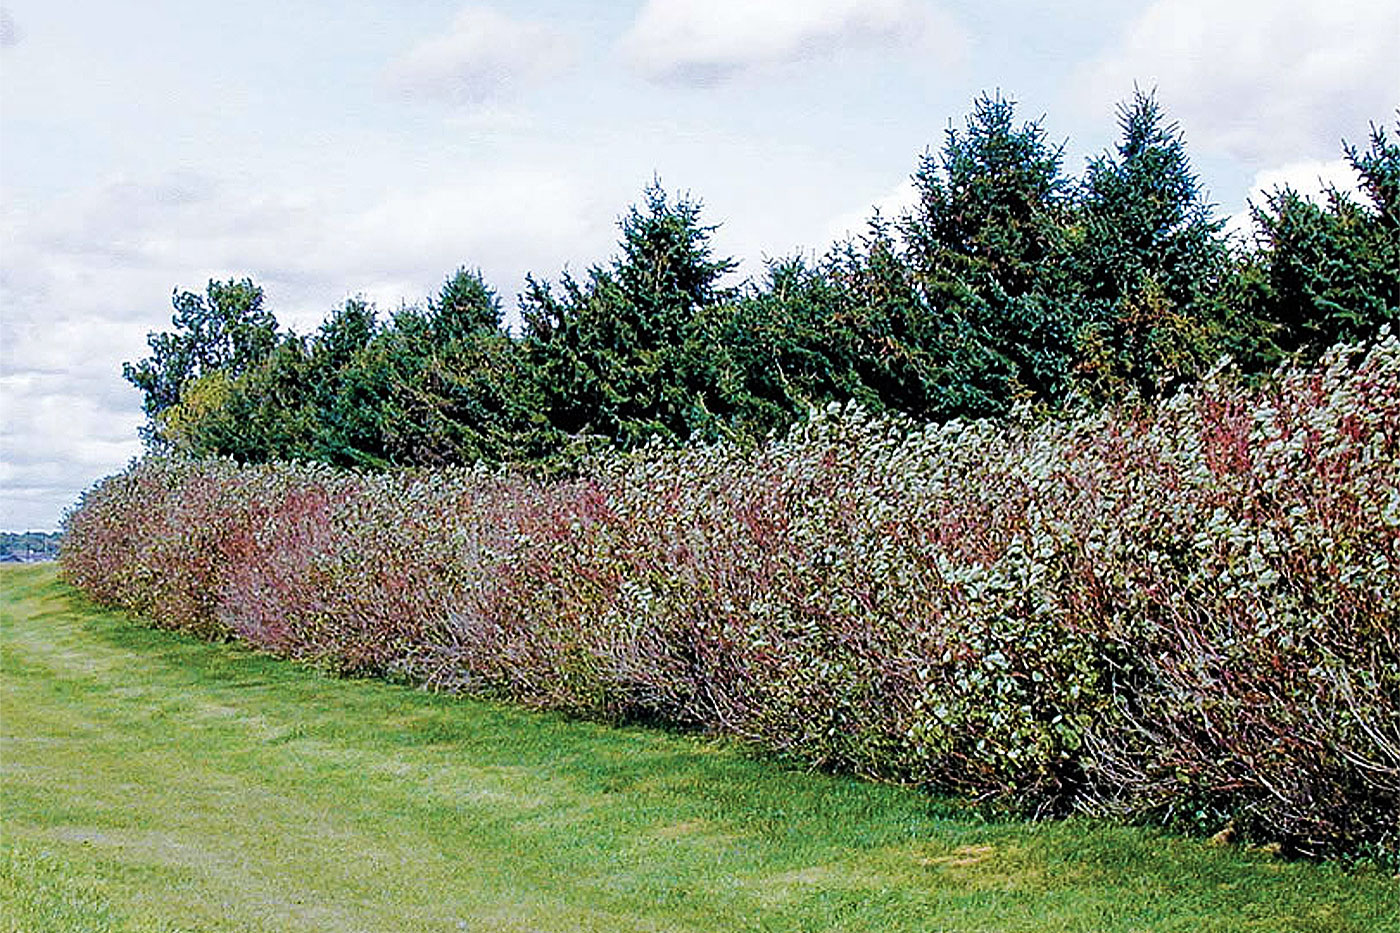 Spruce windbreak with additional red-stemmed dogwoods planted along its edge with a pasture